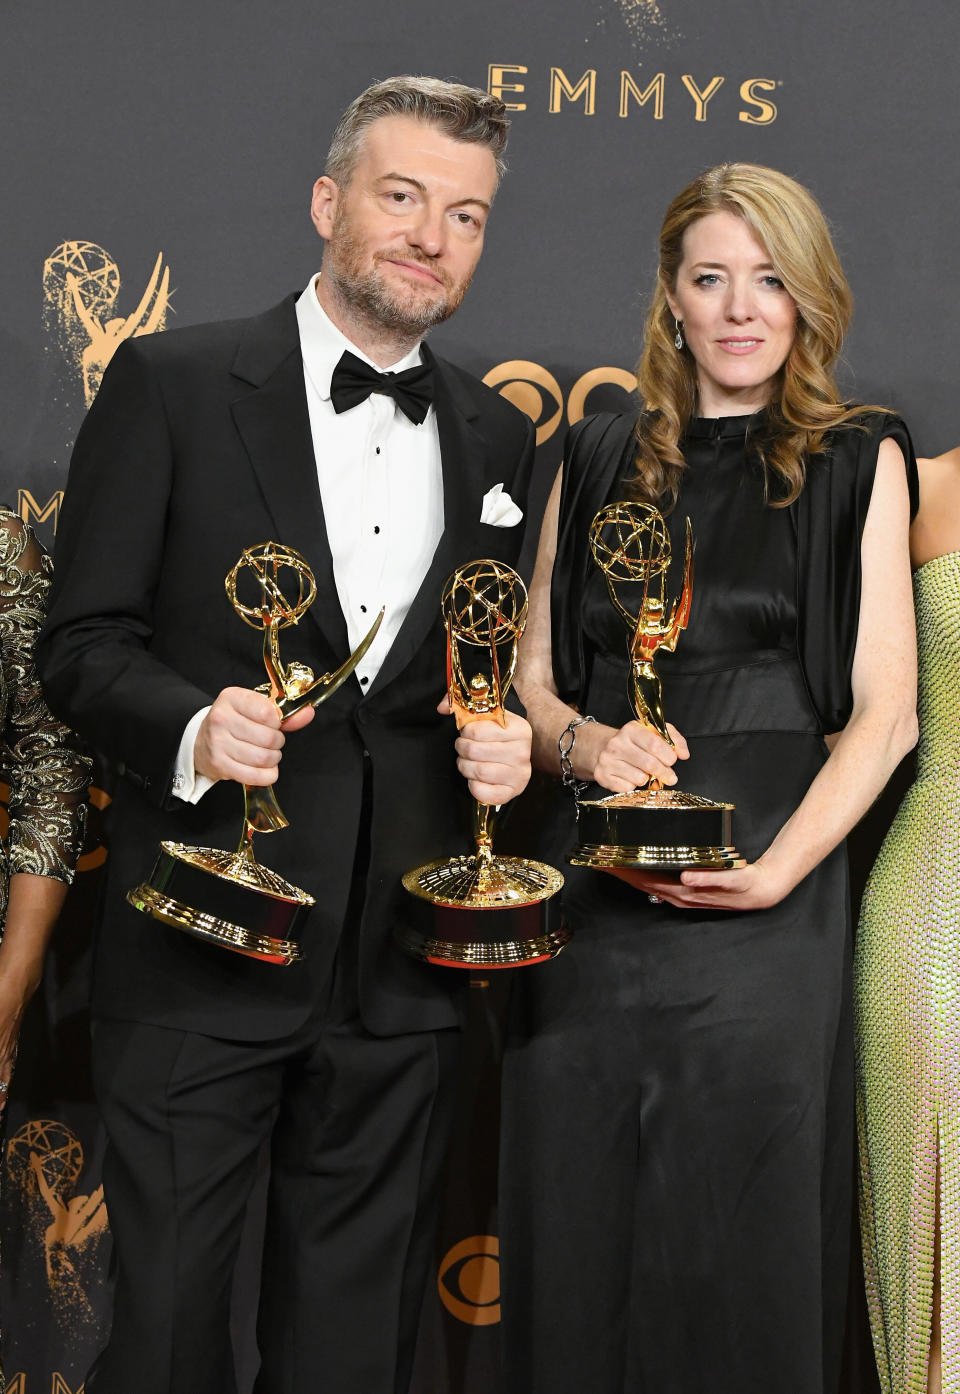 LOS ANGELES, CA - SEPTEMBER 17:  Producers Charlie Brooker (L) and Annabel Jones, winners of the award for Outstanding Television Movie for 'Black Mirror,' poses in the press room during the 69th Annual Primetime Emmy Awards at Microsoft Theater on September 17, 2017 in Los Angeles, California.  (Photo by Steve Granitz/WireImage)